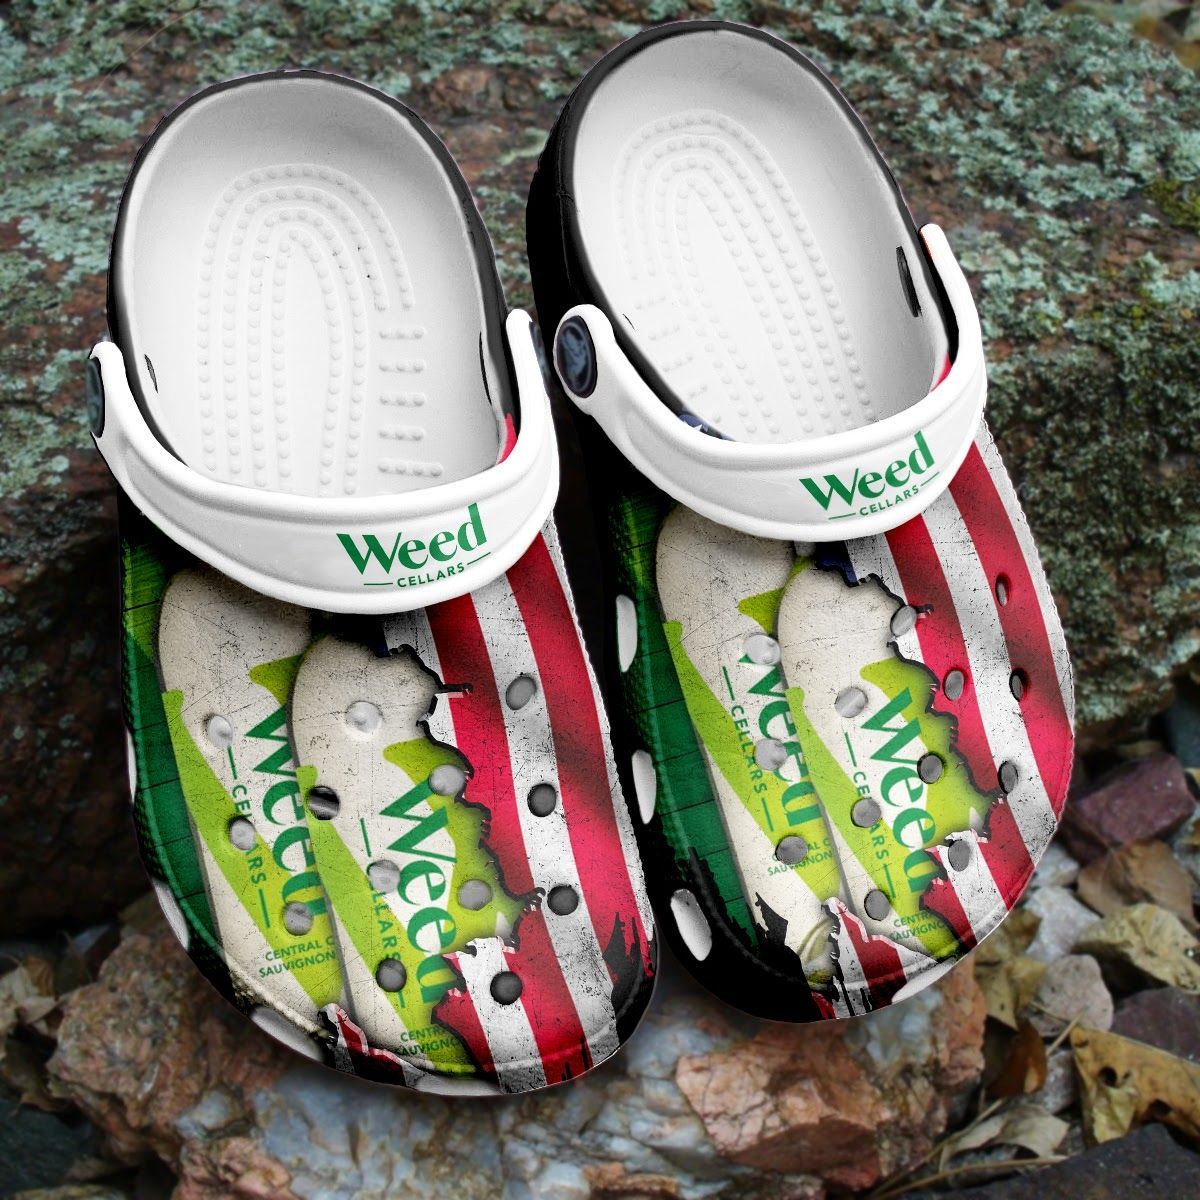 If you'd like to purchase a pair of Crocband Clogs, be sure to check out the official website. 147